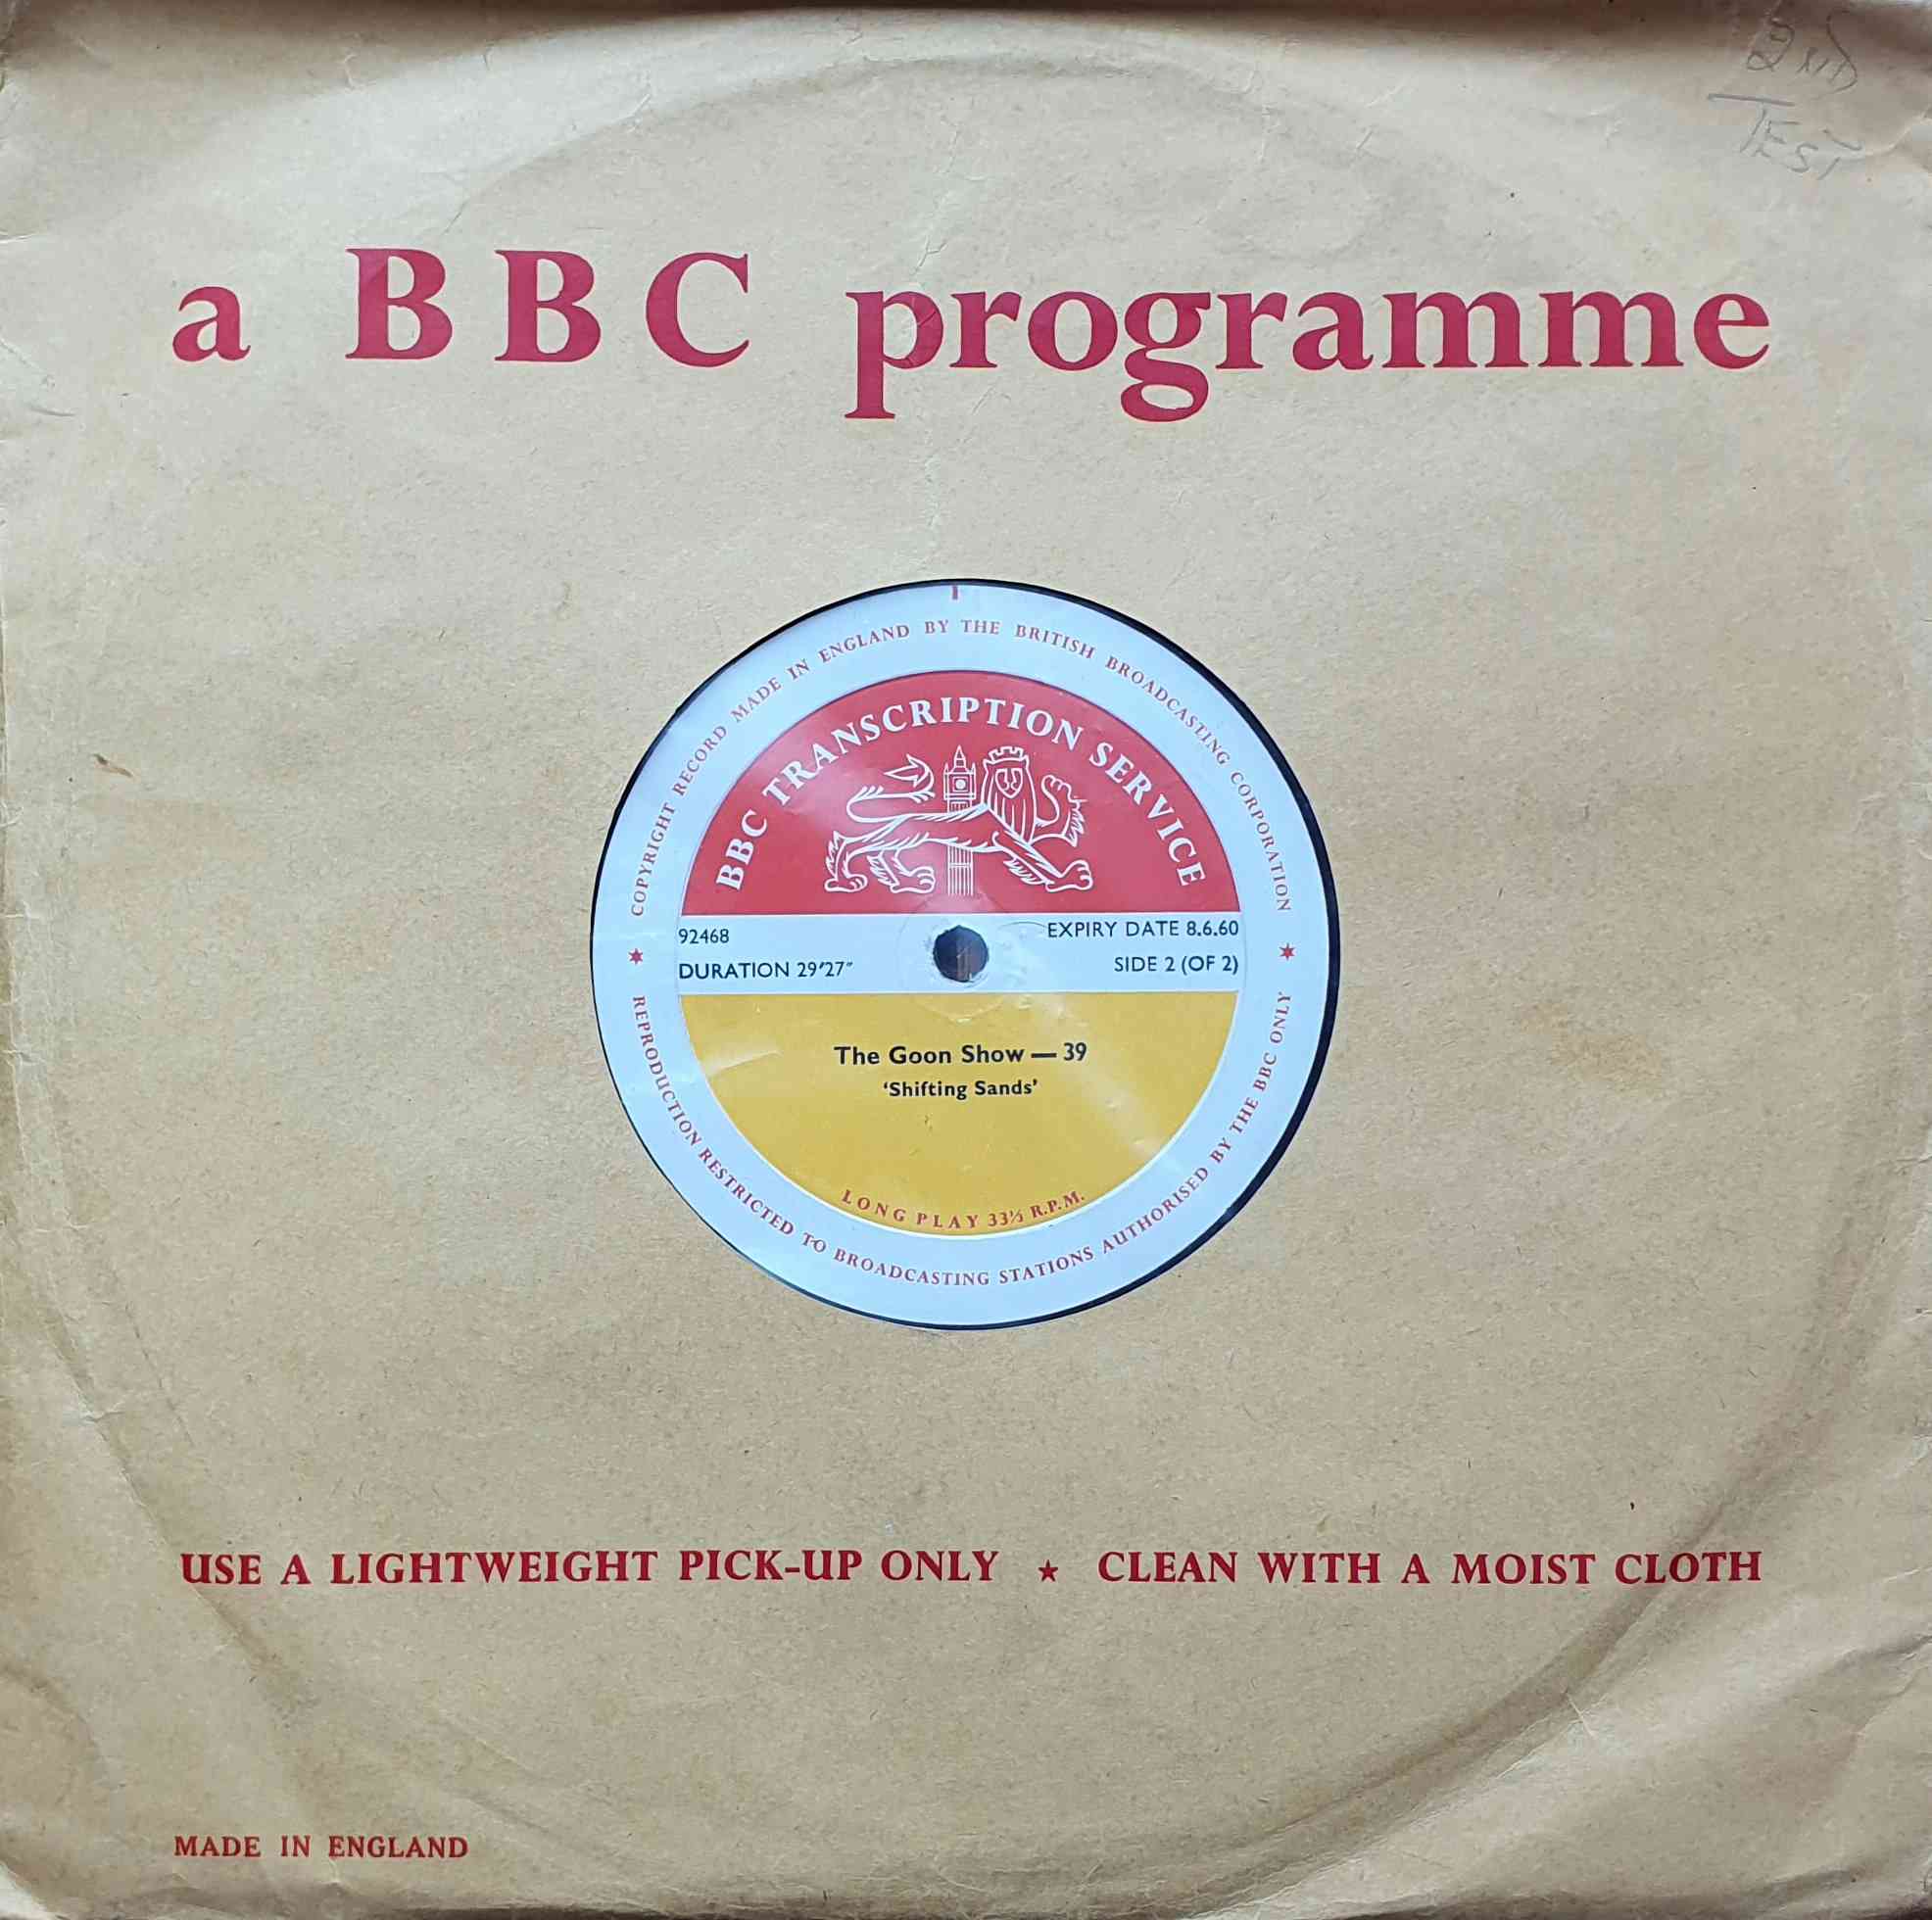 Picture of The Goon Show - 39 / 40 (Side 2 of 2) by artist Unknown from the BBC 10inches - Records and Tapes library